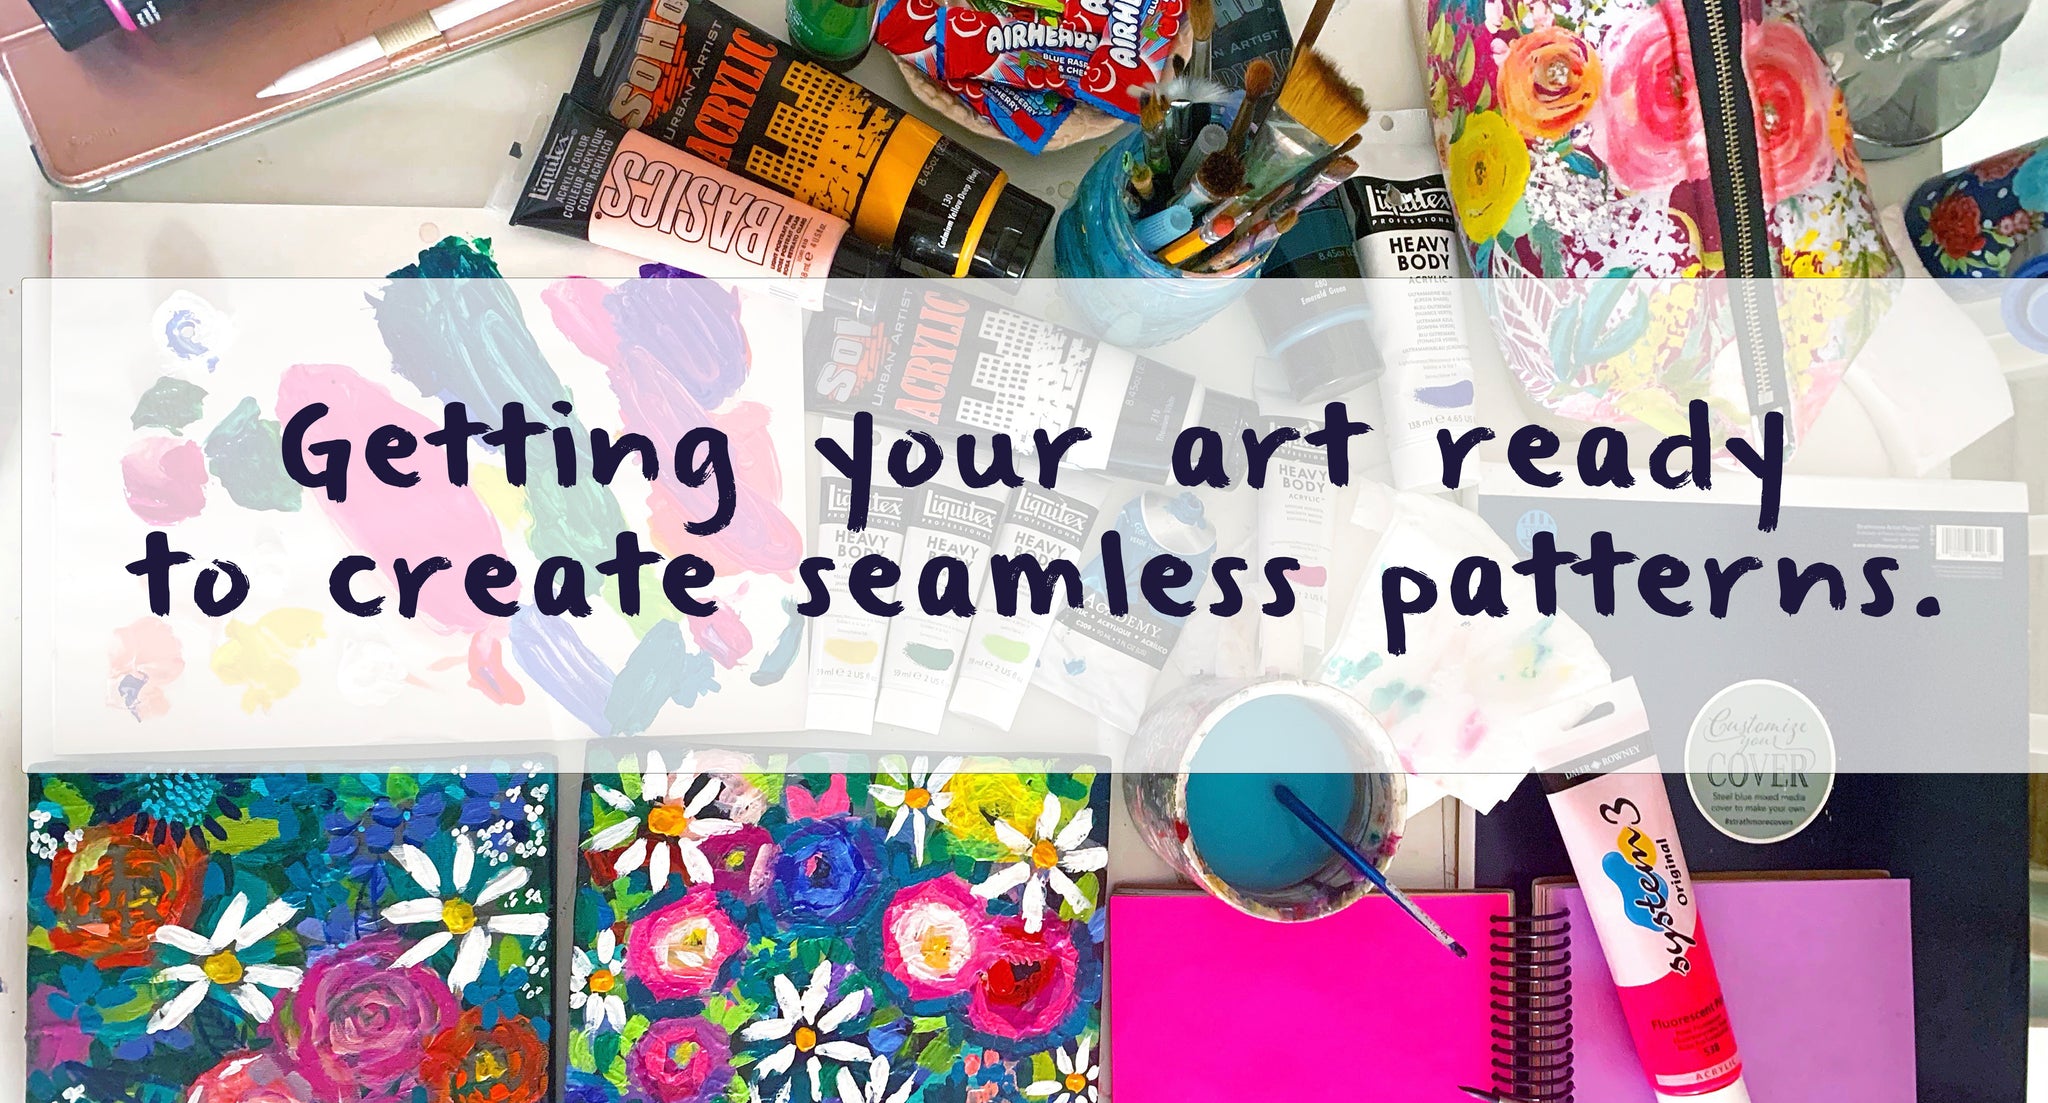 Getting your art ready to create patterns.